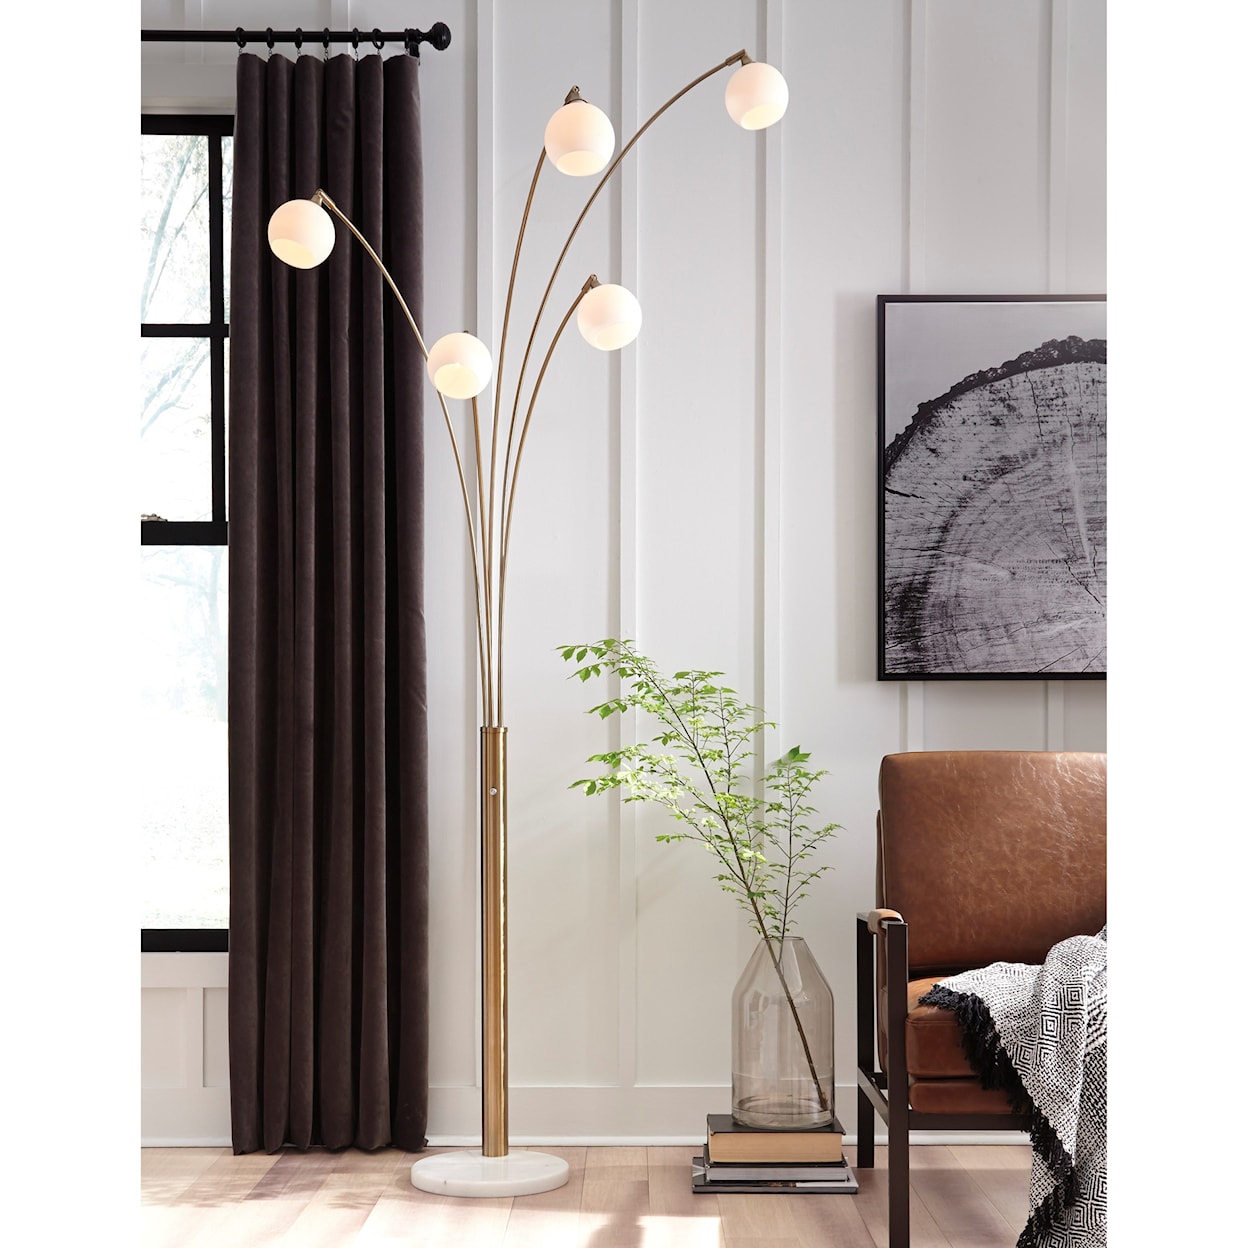 Signature Design by Ashley Lamps - Contemporary Taliya Champagne/White Metal Arc Lamp